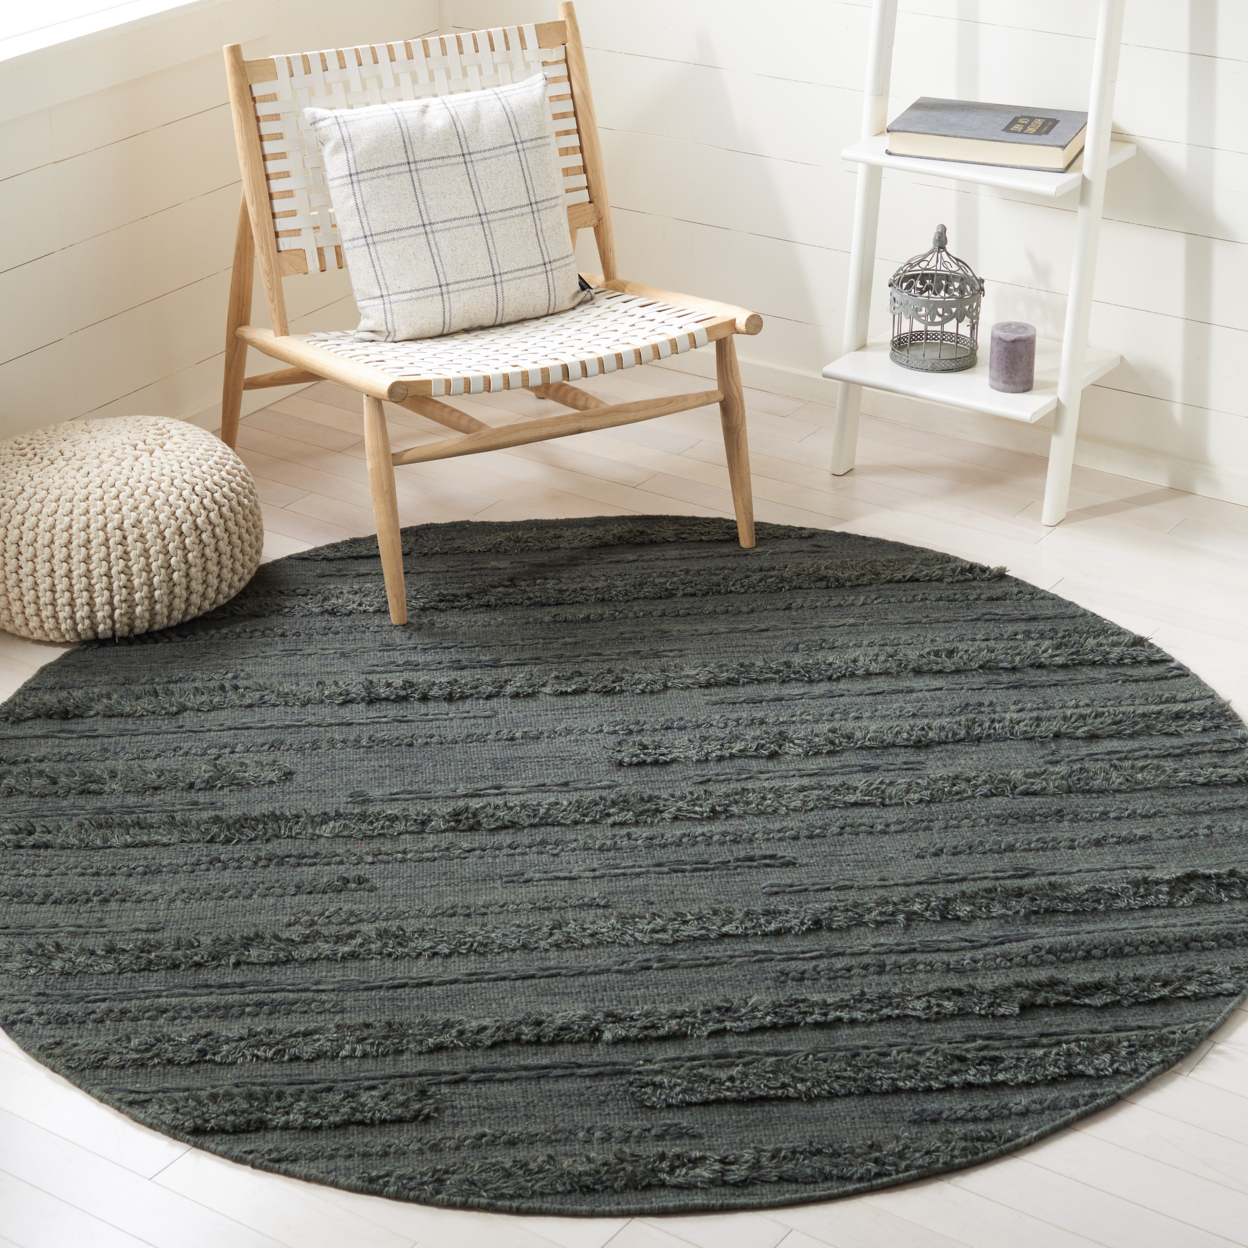 SAFAVIEH Vermont VRM901H Handwoven Charcoal / Ivory Rug - 6' Square